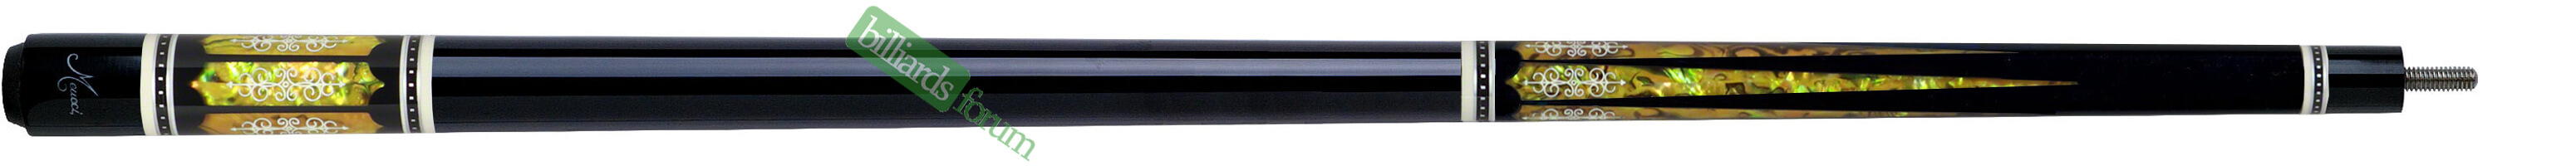 Black Meucci 21st Century Series #3 Cue with Yellow Paua Shell Inlay, Model 21-3-C-Y